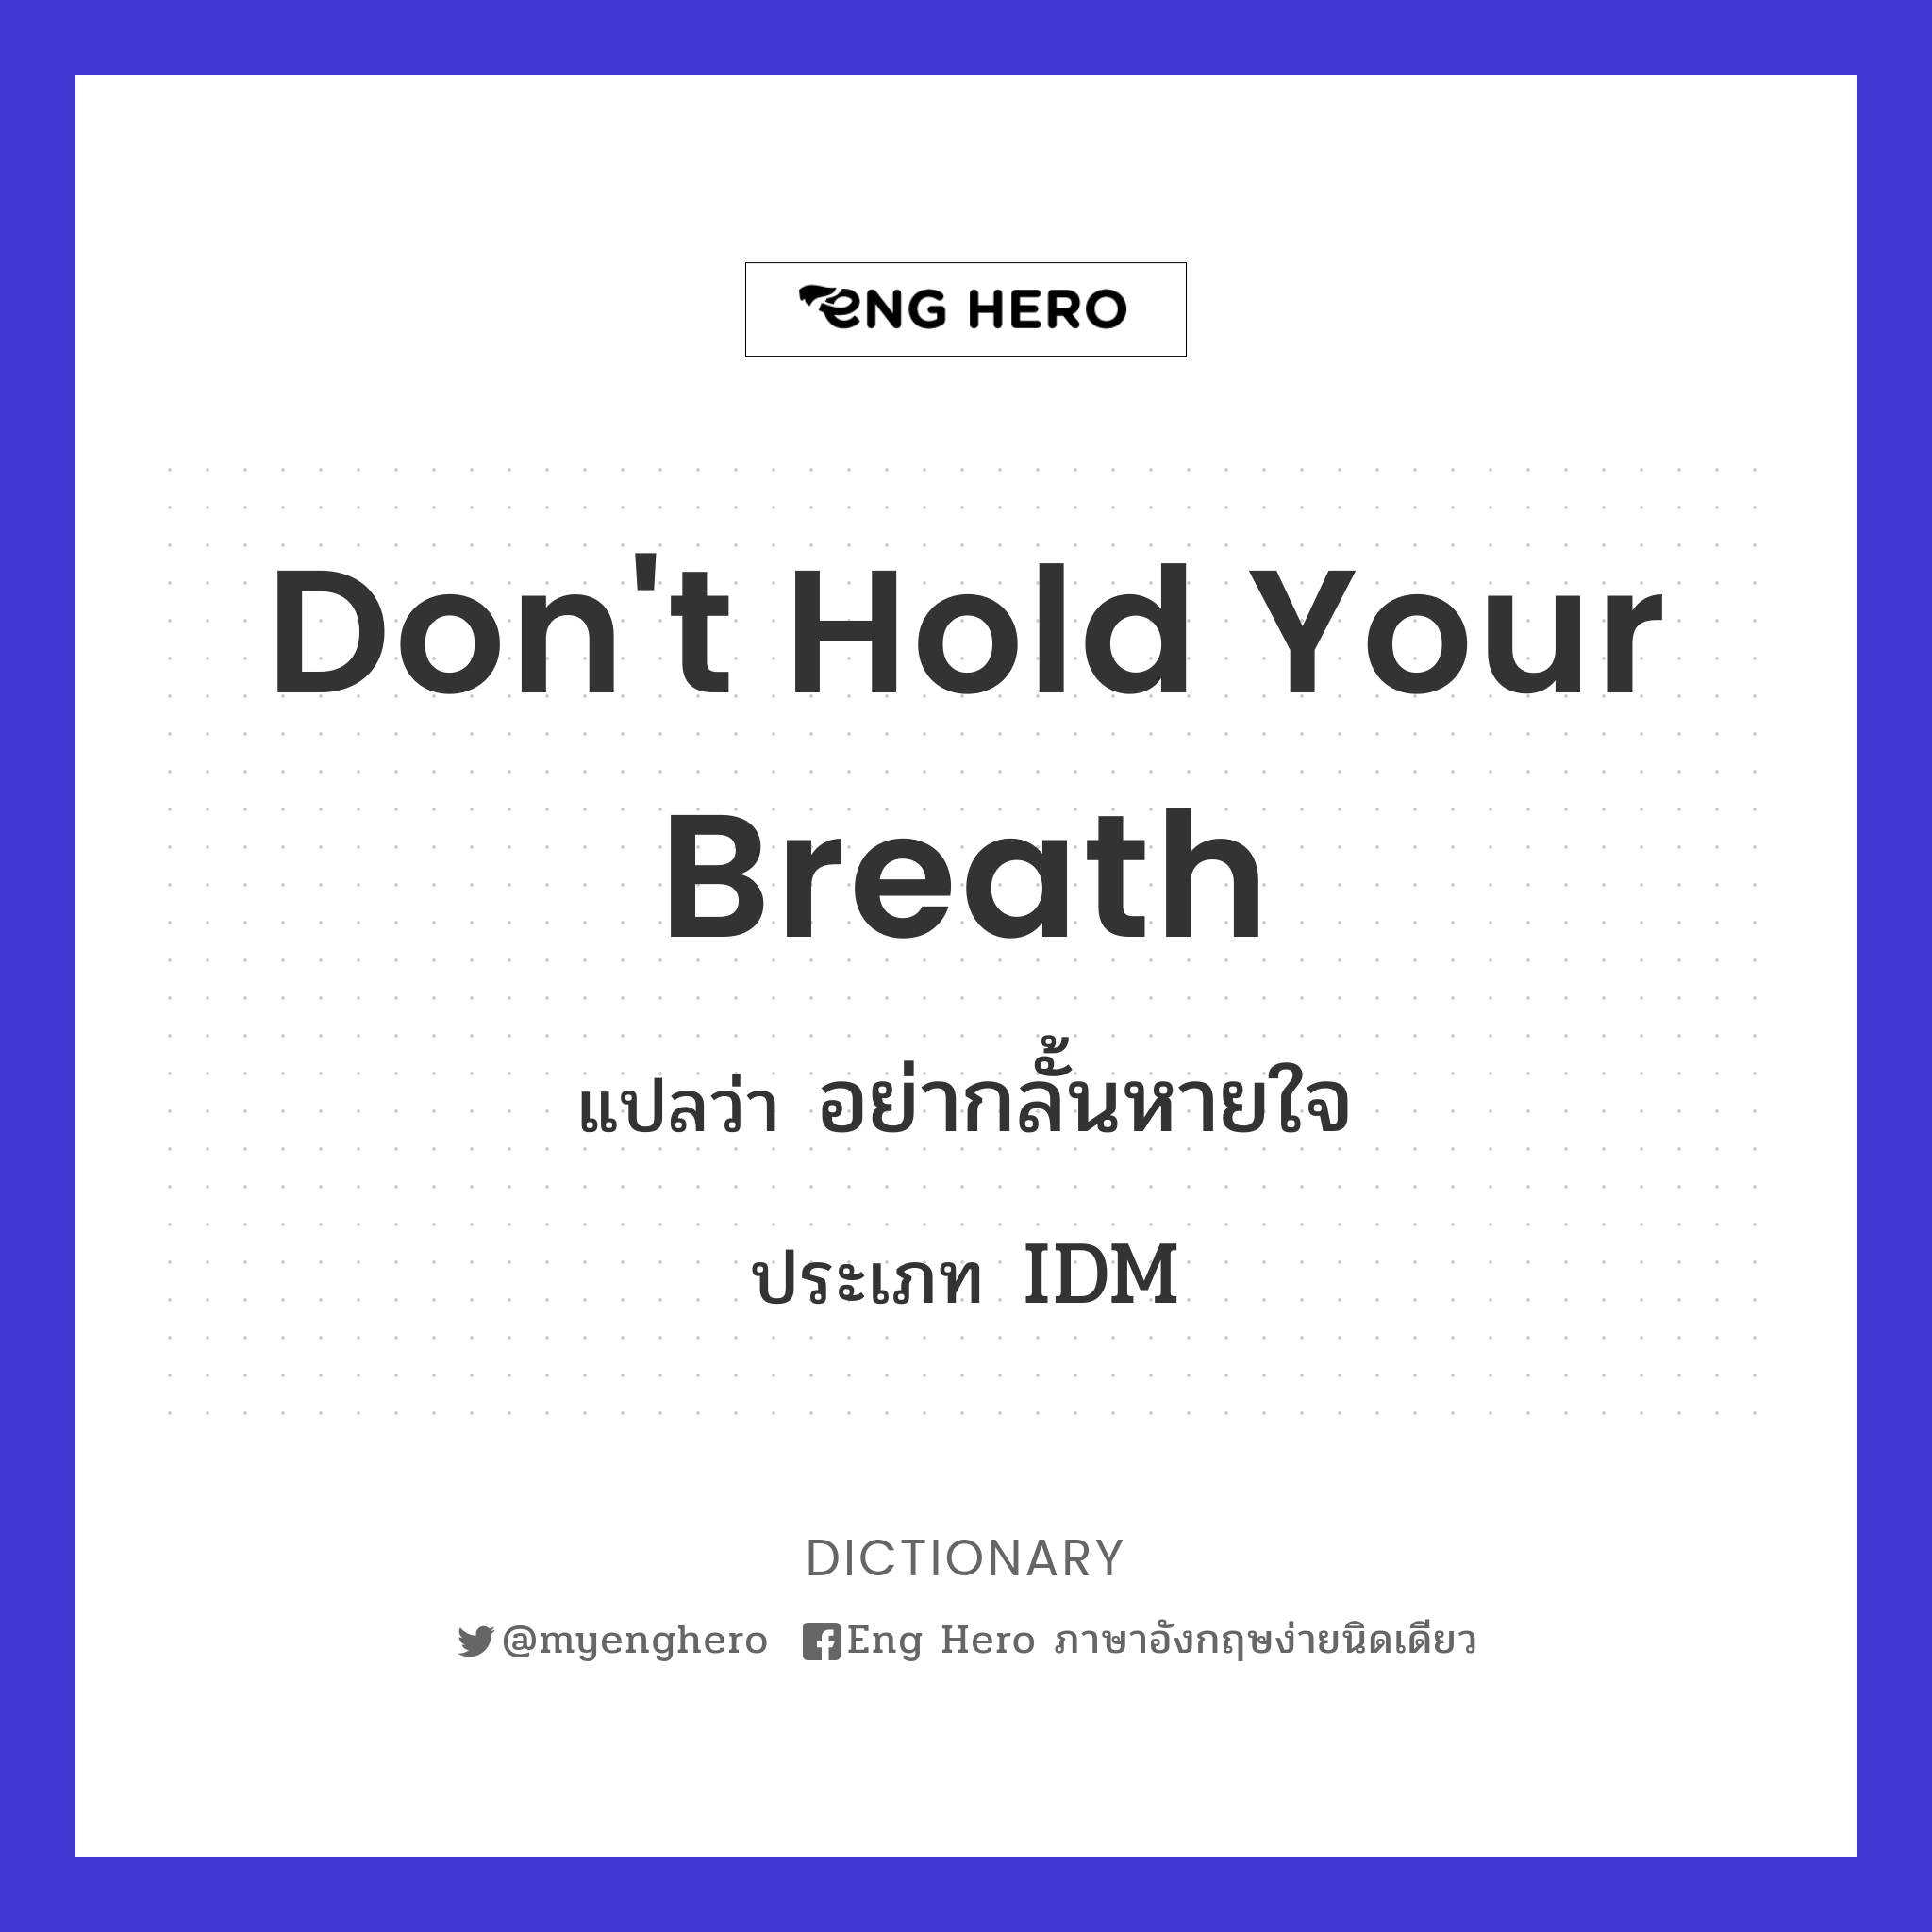 Don't hold your breath